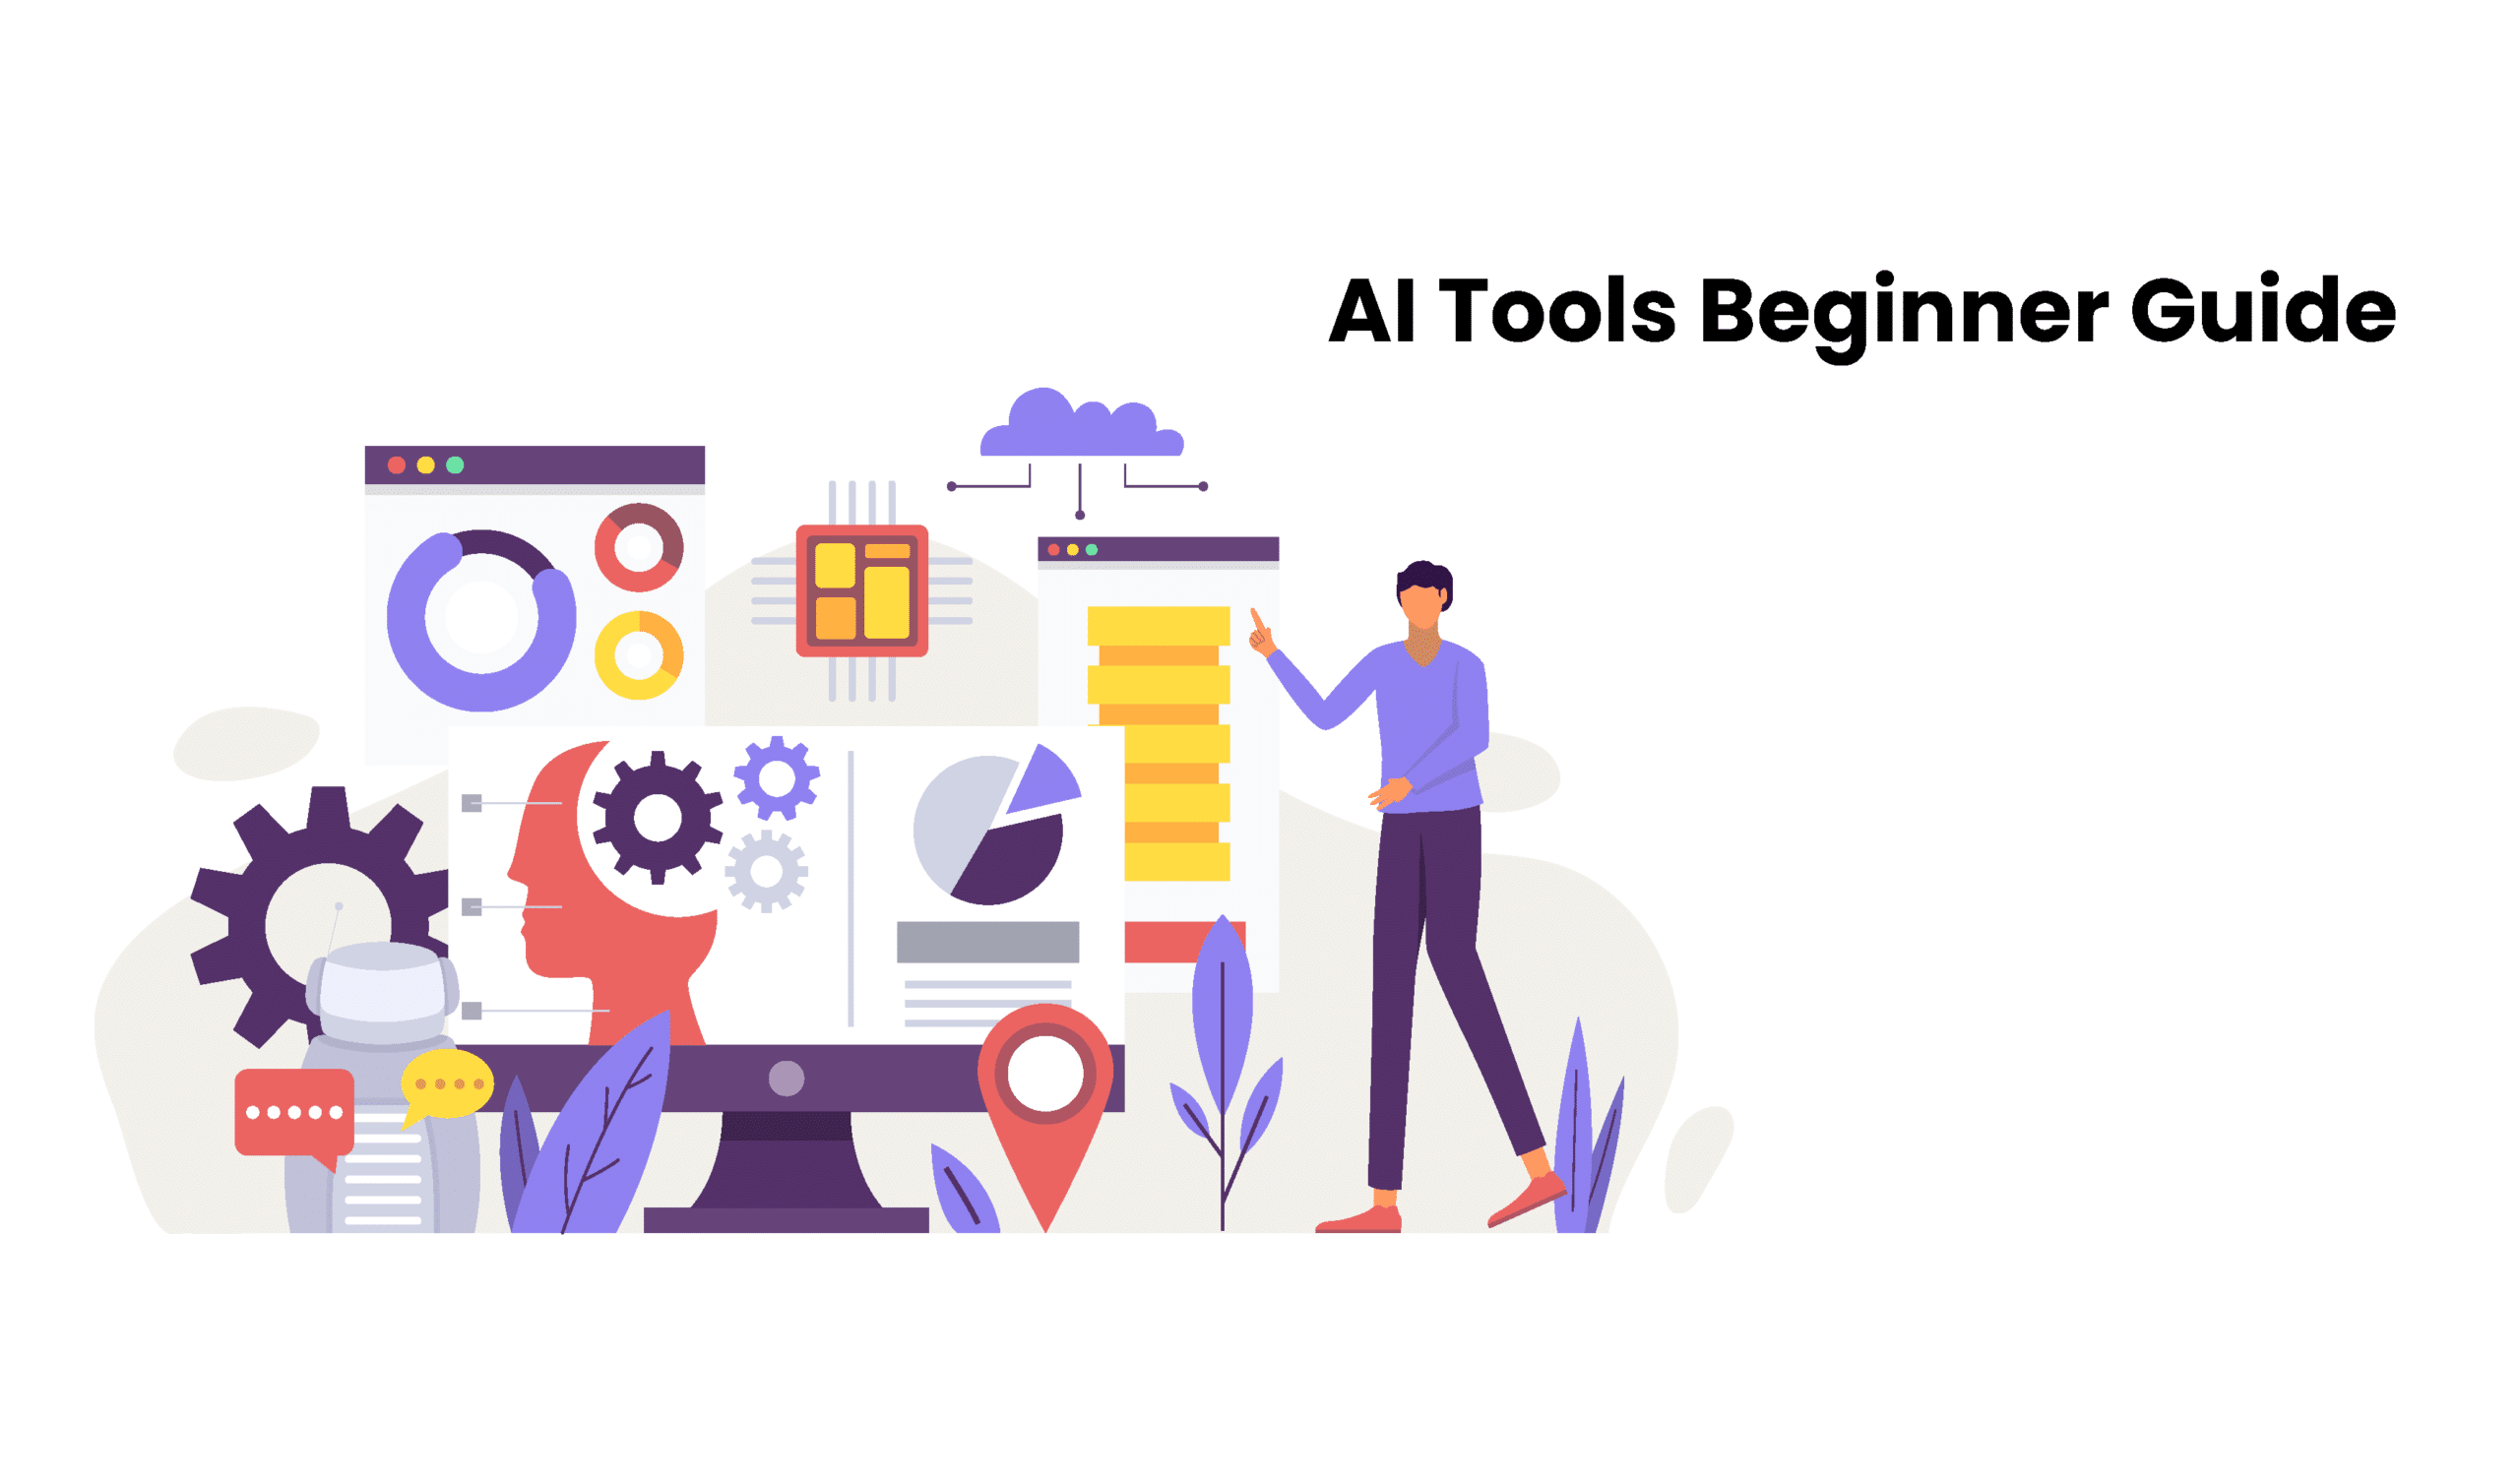 A Beginner’s Guide to AI Tools: How to Get Started